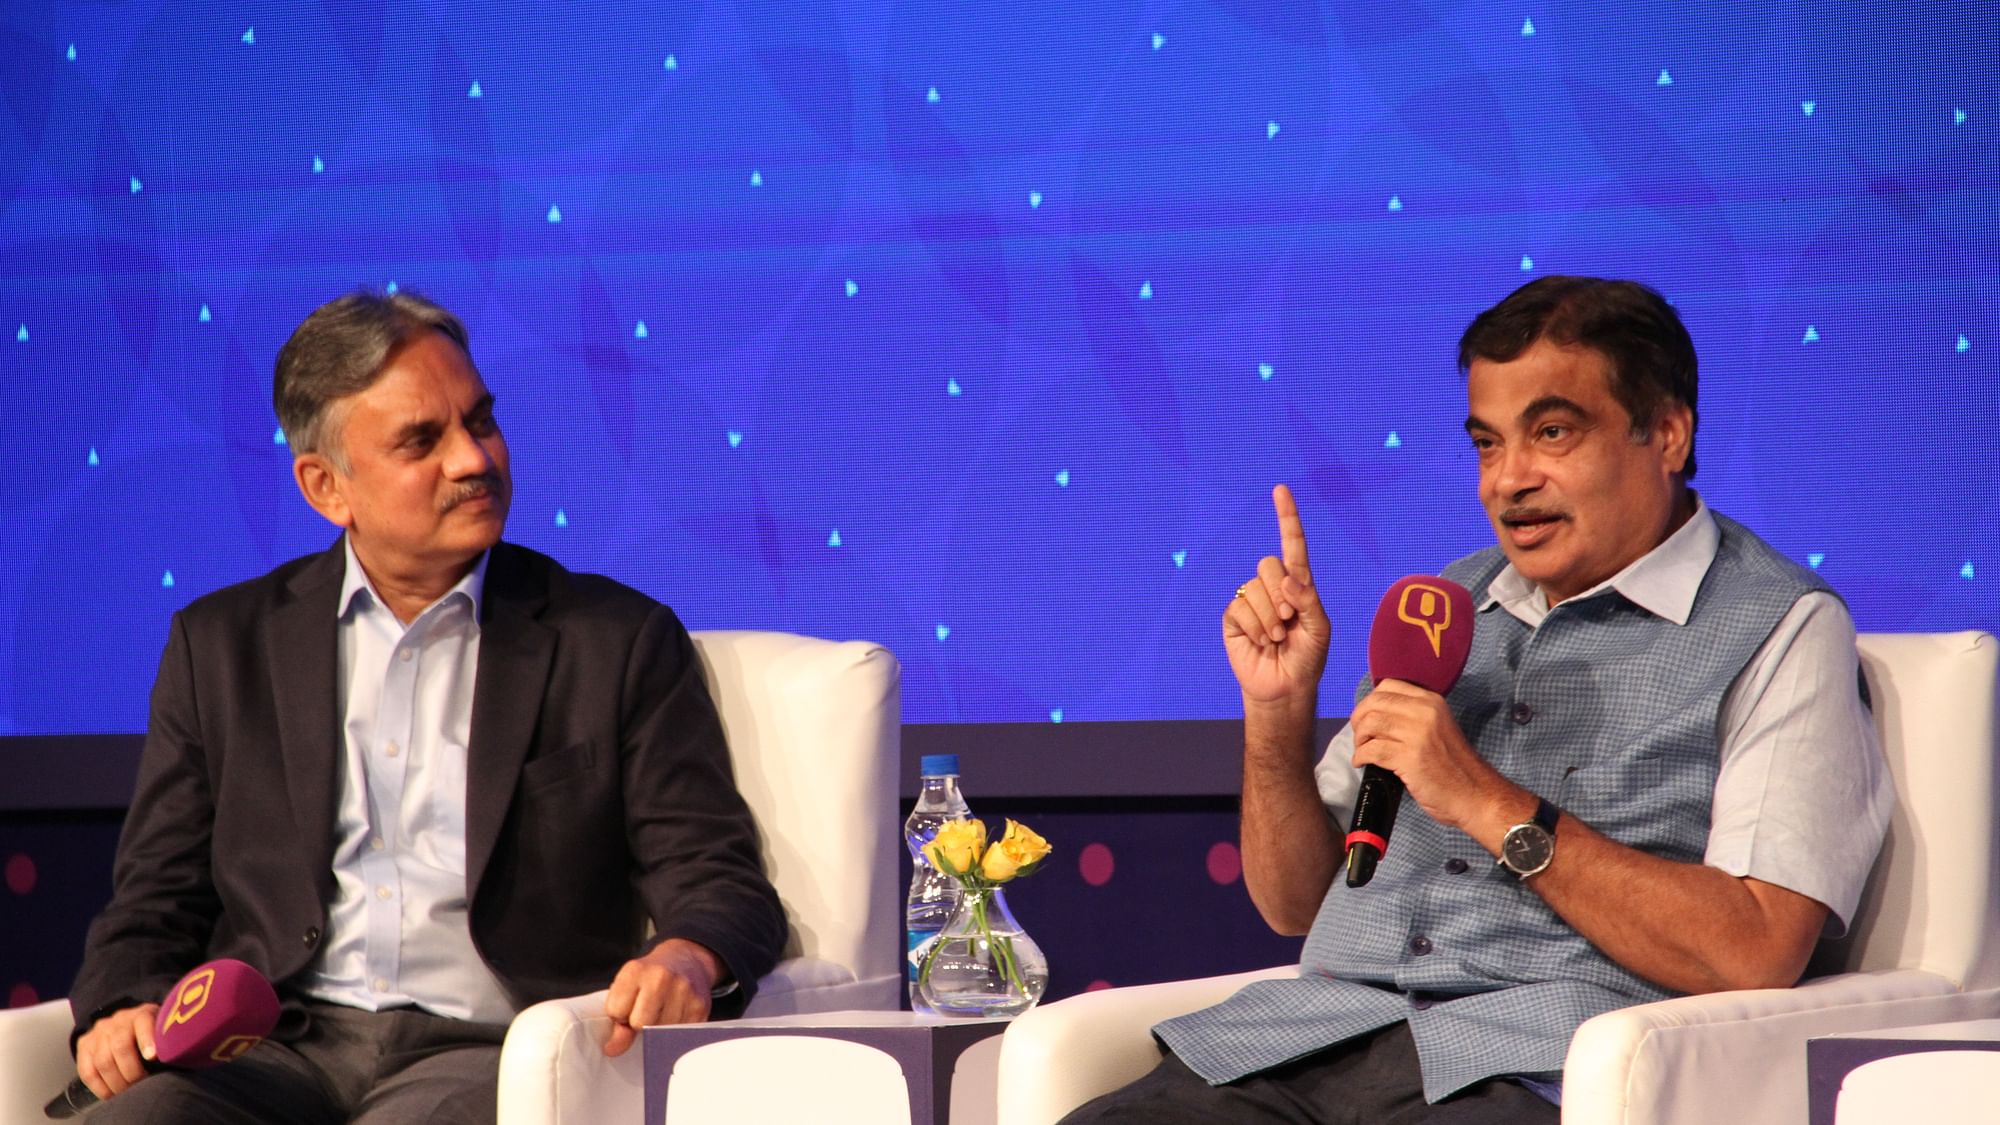 At Quint Hindi and Google’s ‘BOL - Love Your Bhasha’ event, Union Minister Nitin Gadkari speaks exclusively to Quint’s Editorial Director Sanjay Pugalia